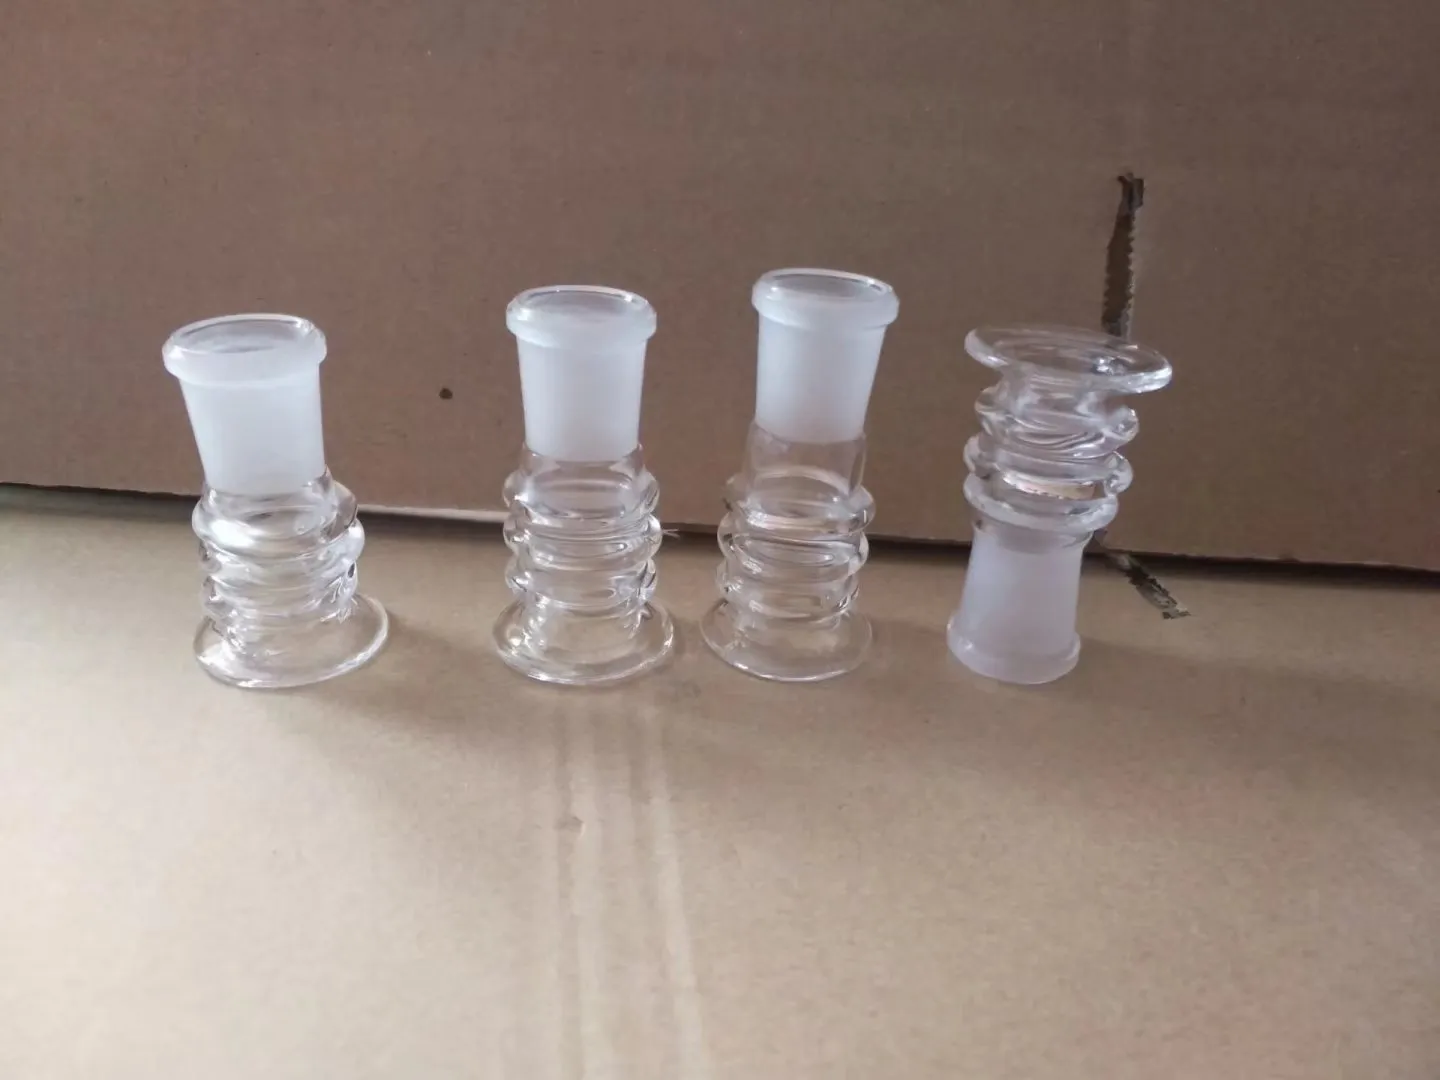 2018 new multi line adapter ,Wholesale Bongs Oil Burner Pipes Water Pipes Glass Rigs Smoking